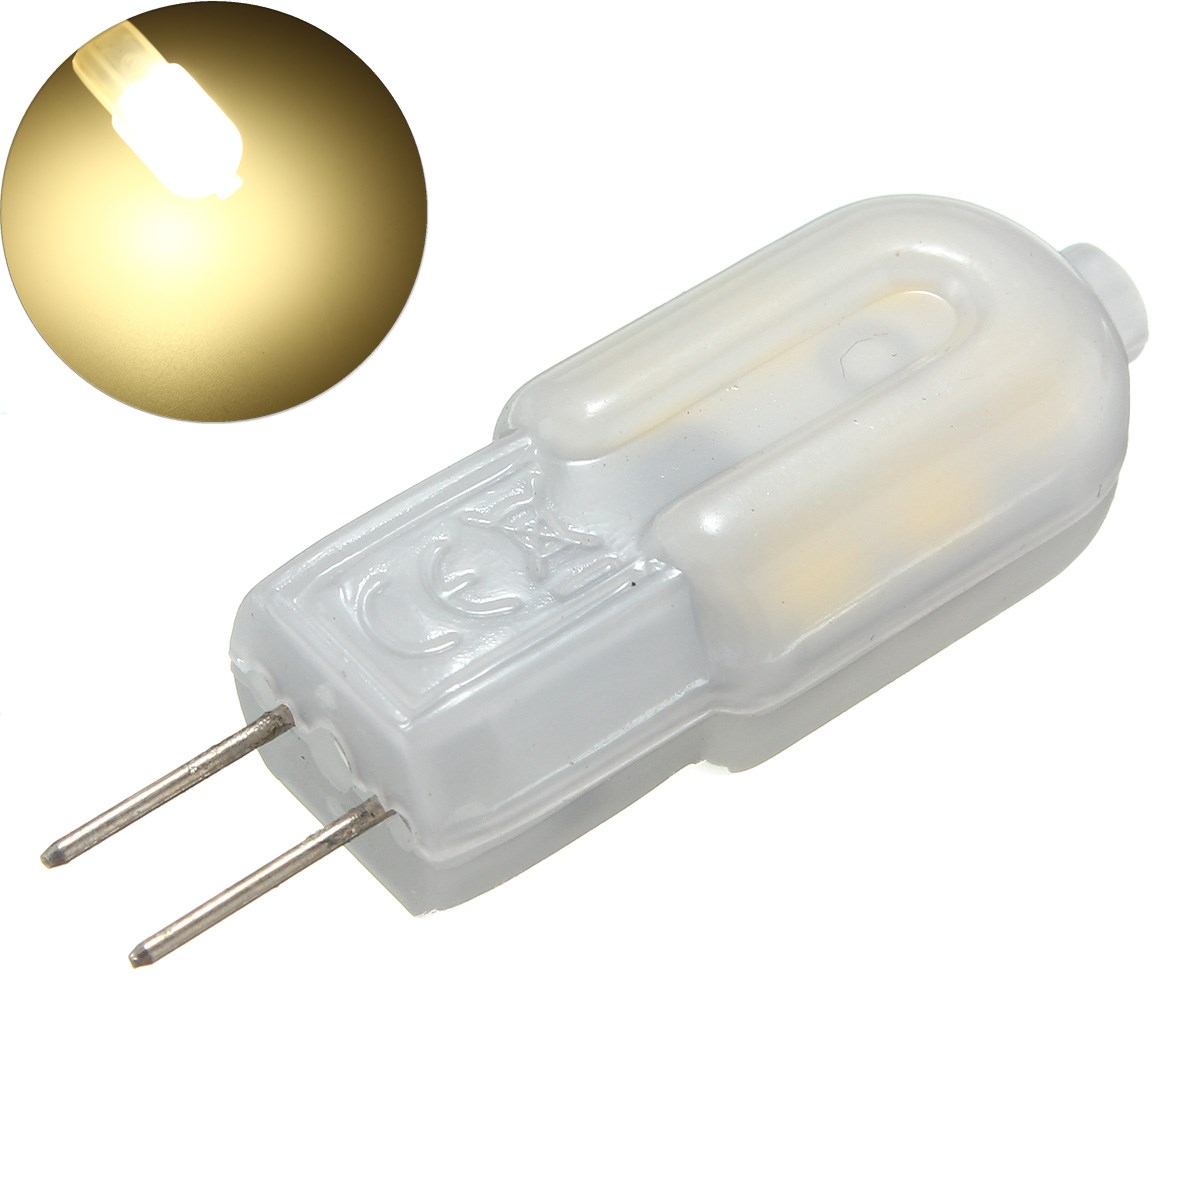 

5PCS G4 2W Non-dimmable SMD2835 Milk Cover Natural White 12LED Light Bulb for Indoor Home DC12V